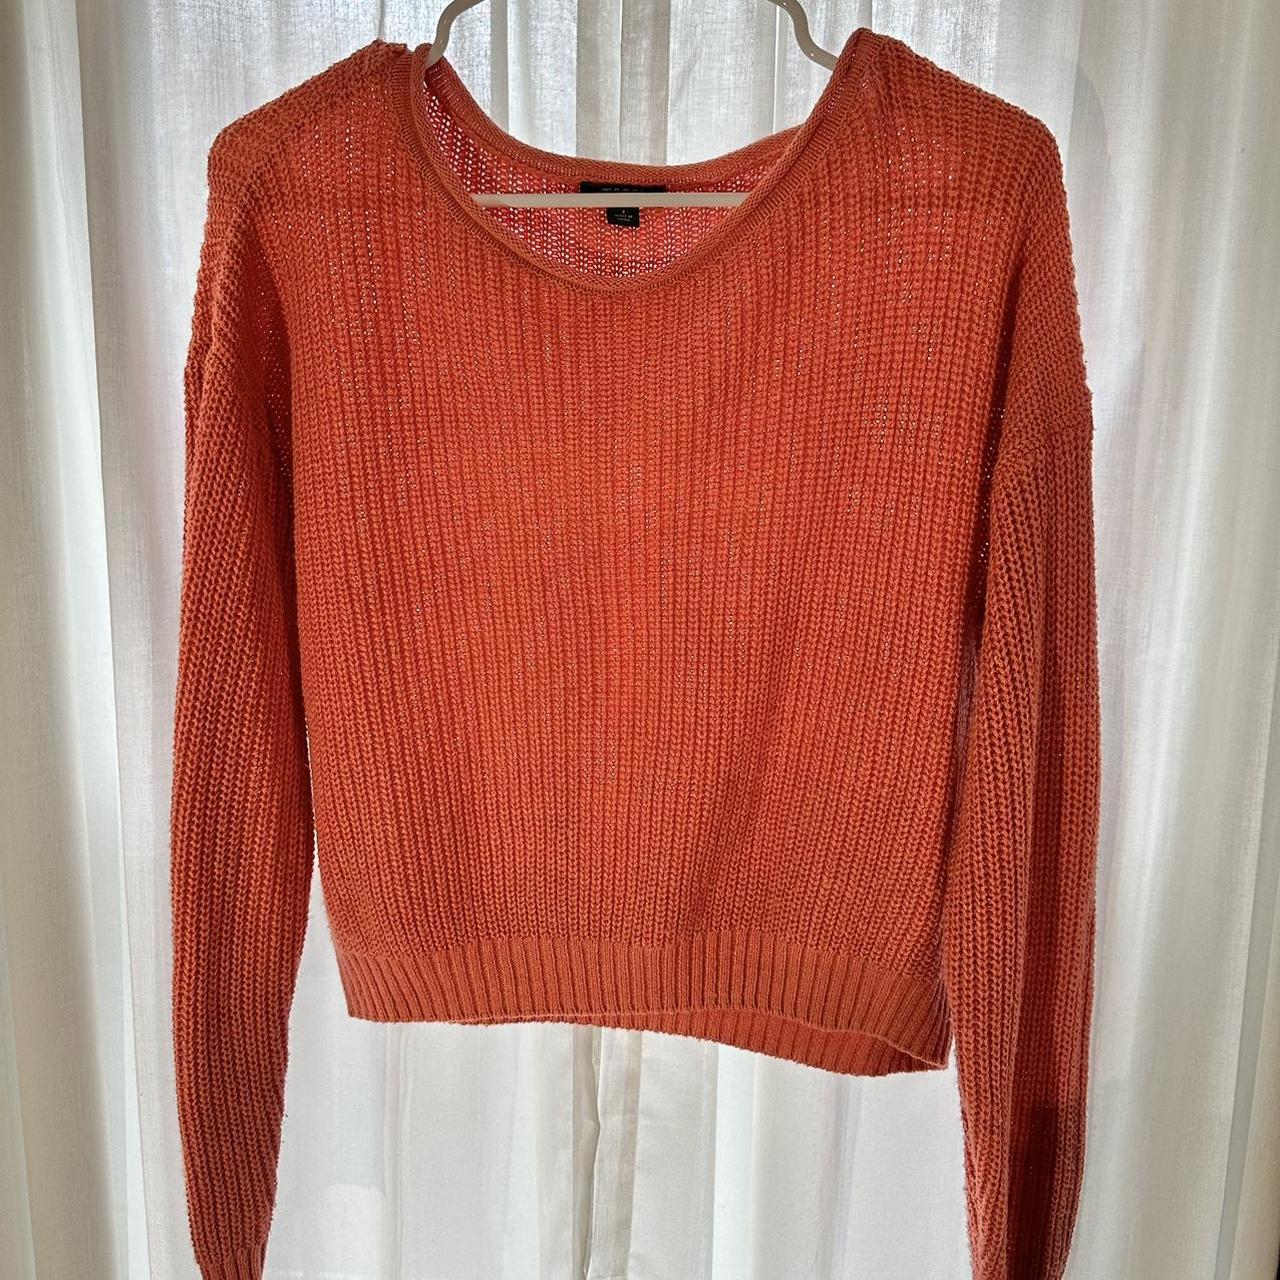 cropped wild fable sweater #sweater #wildfable - Depop